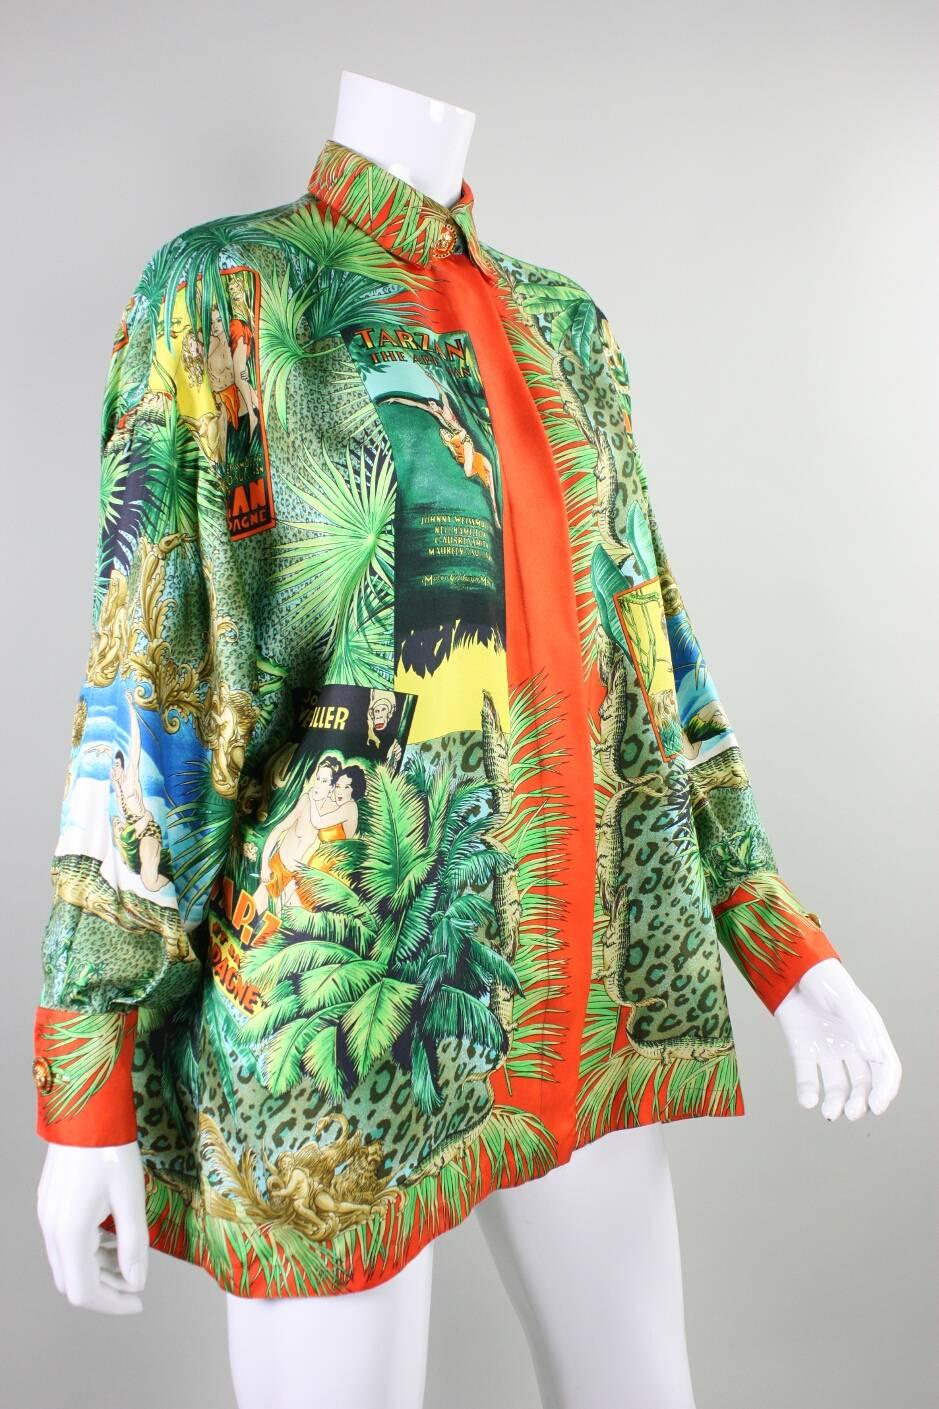 1993 Gianni Versace blouse is made of silk twill and features the iconic Tarzan motif. Gold-toned Medusa buttons with orange enamel at neckline and cuffs. Center front lapped button closure. Unlined.

Label size 38; however, garment is meant to be